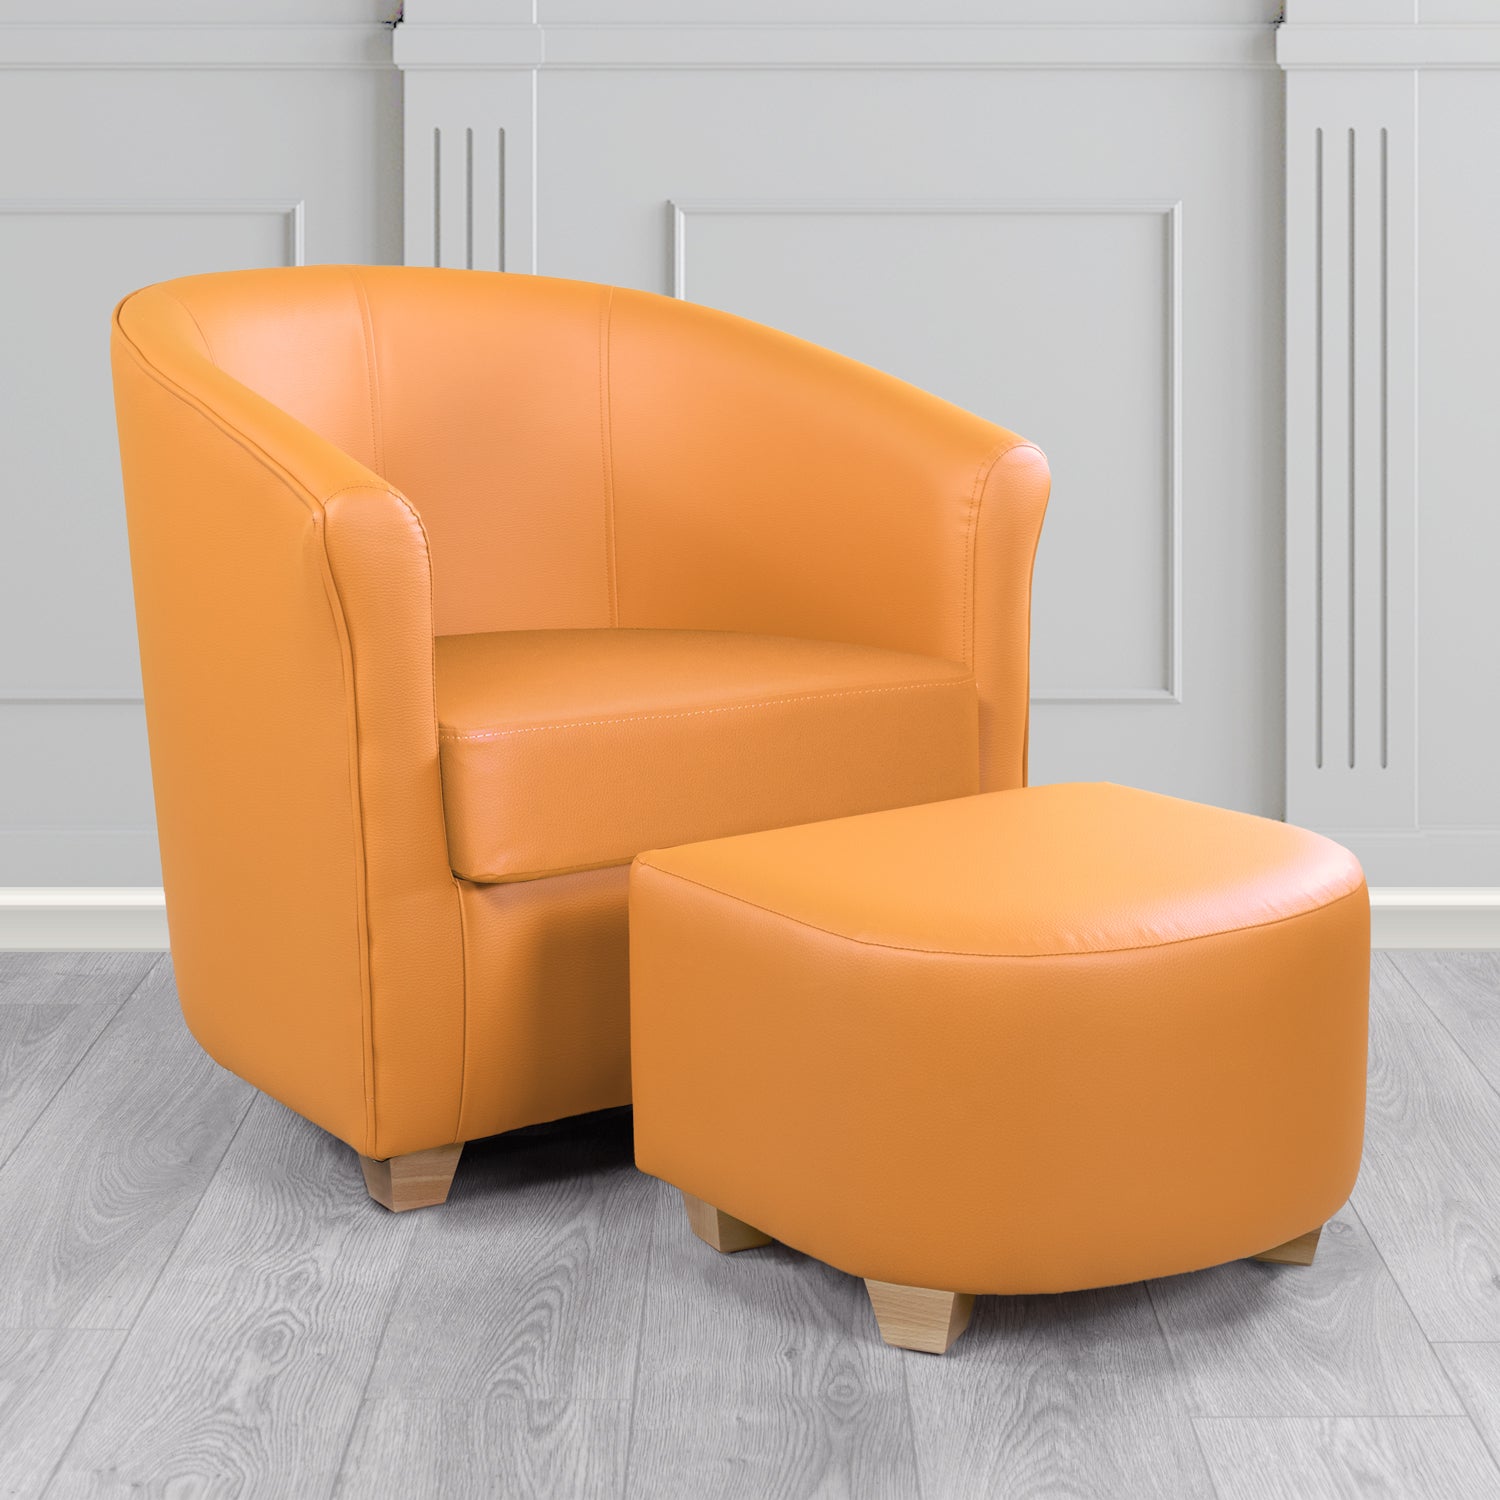 Cannes Tub Chair with Footstool Set in Just Colour Tangerine Crib 5 Faux Leather - The Tub Chair Shop